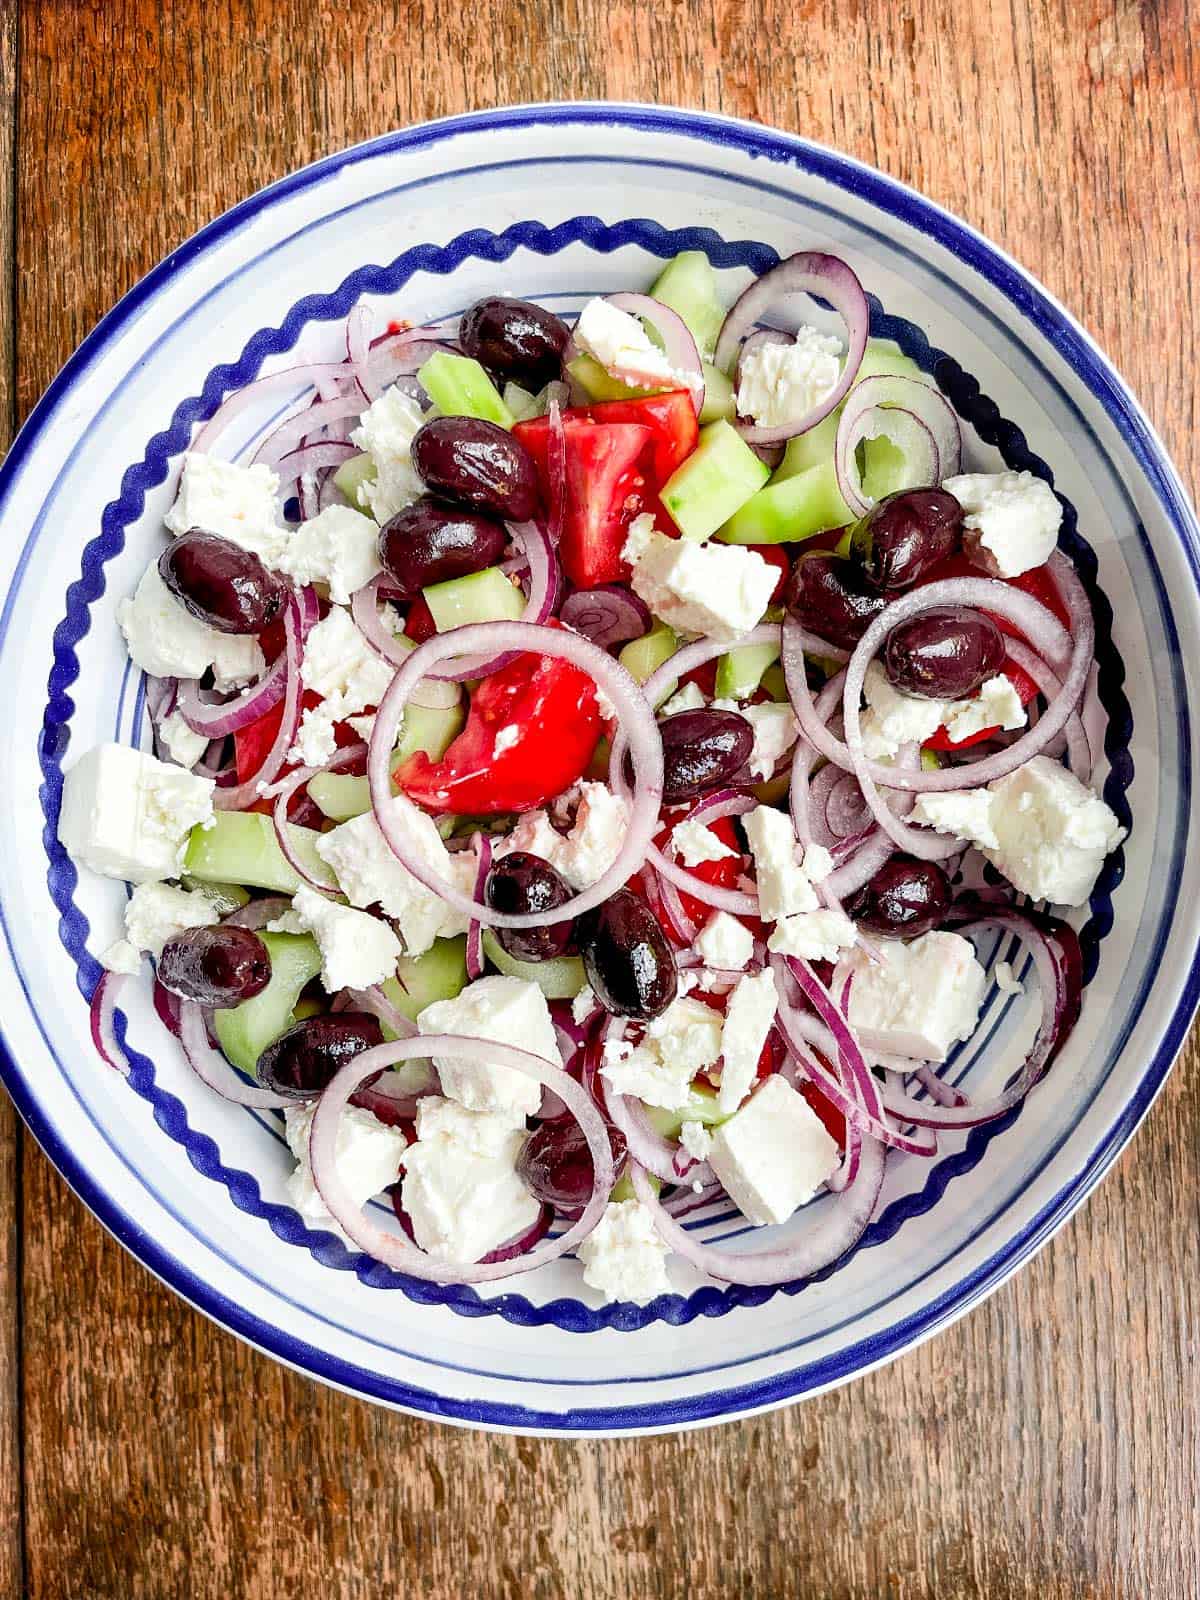 A blue and white bowl full of Greek salad on a wooden table.